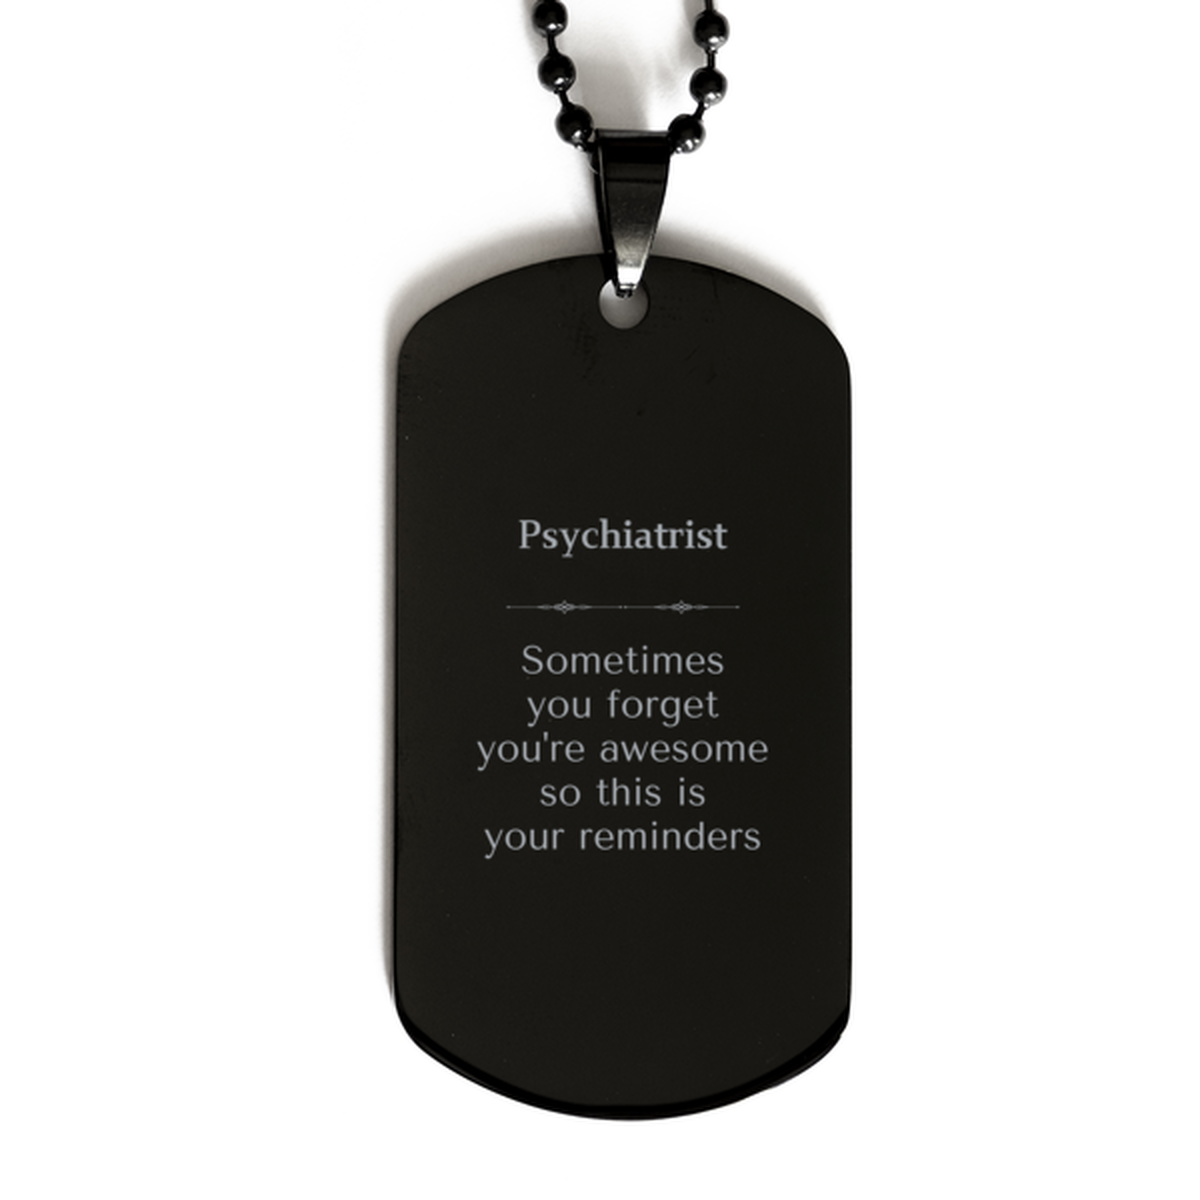 Sentimental Psychiatrist Black Dog Tag, Psychiatrist Sometimes you forget you're awesome so this is your reminders, Graduation Christmas Birthday Gifts for Psychiatrist, Men, Women, Coworkers